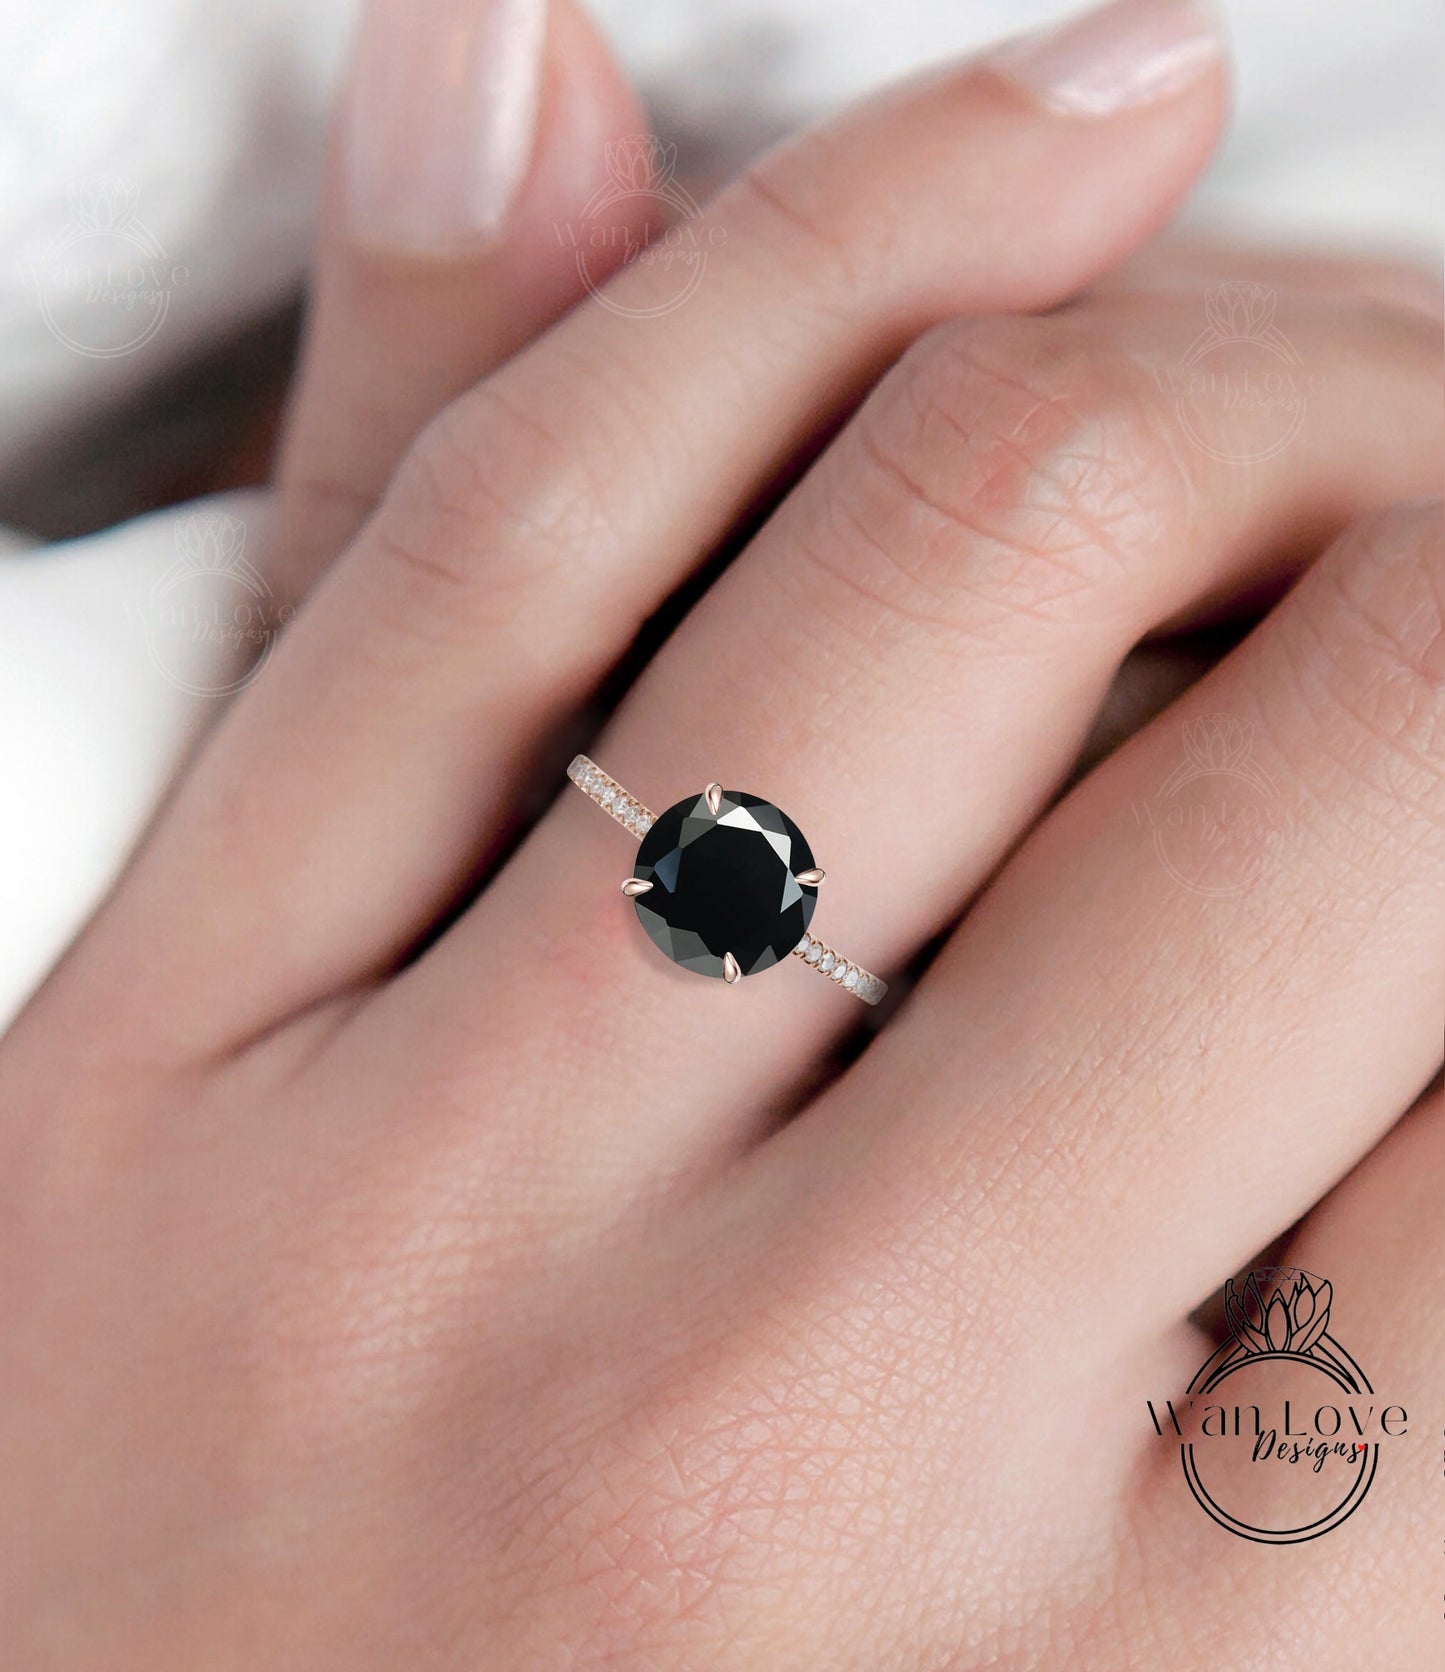 Round cut Black Spinel engagement ring white gold moissanite/diamond side halo ring art deco almost eternity wedding ring diamond halo rings Wan Love Designs